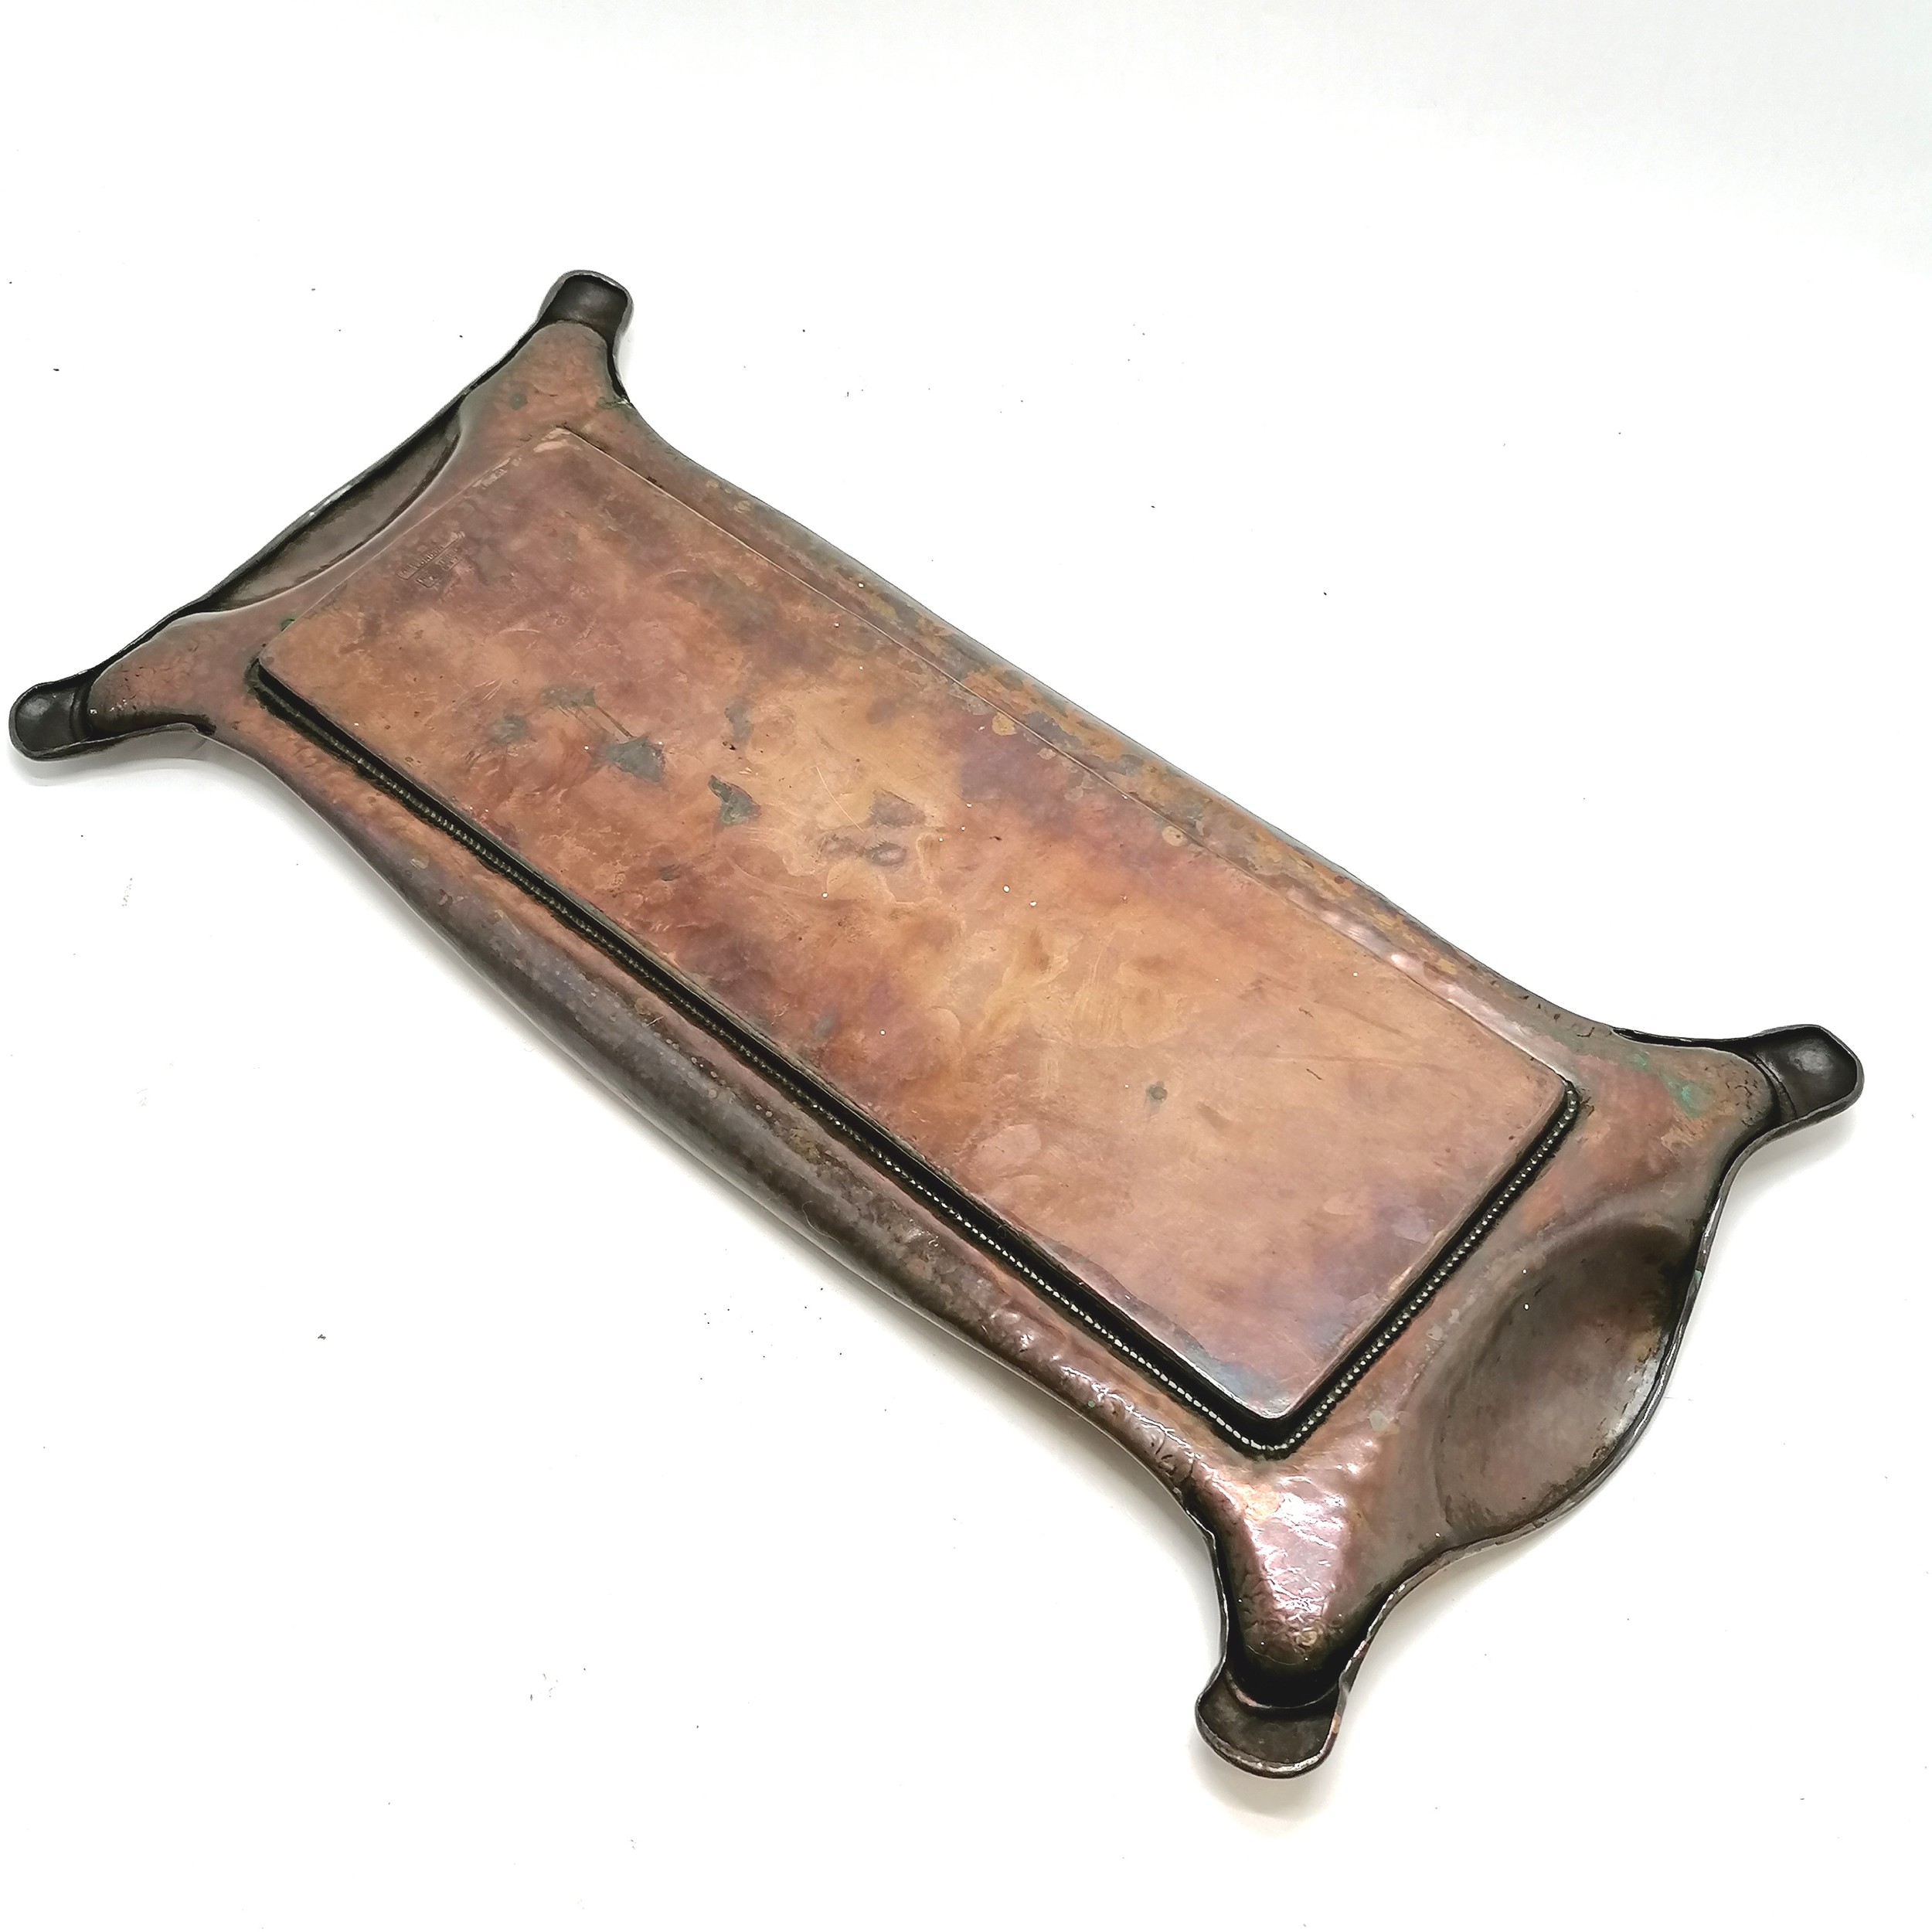 c.1905 Art Nouveau hammered copper serving tray by Norman & Ernest Spittle for Art Fittings Ltd as - Image 2 of 6